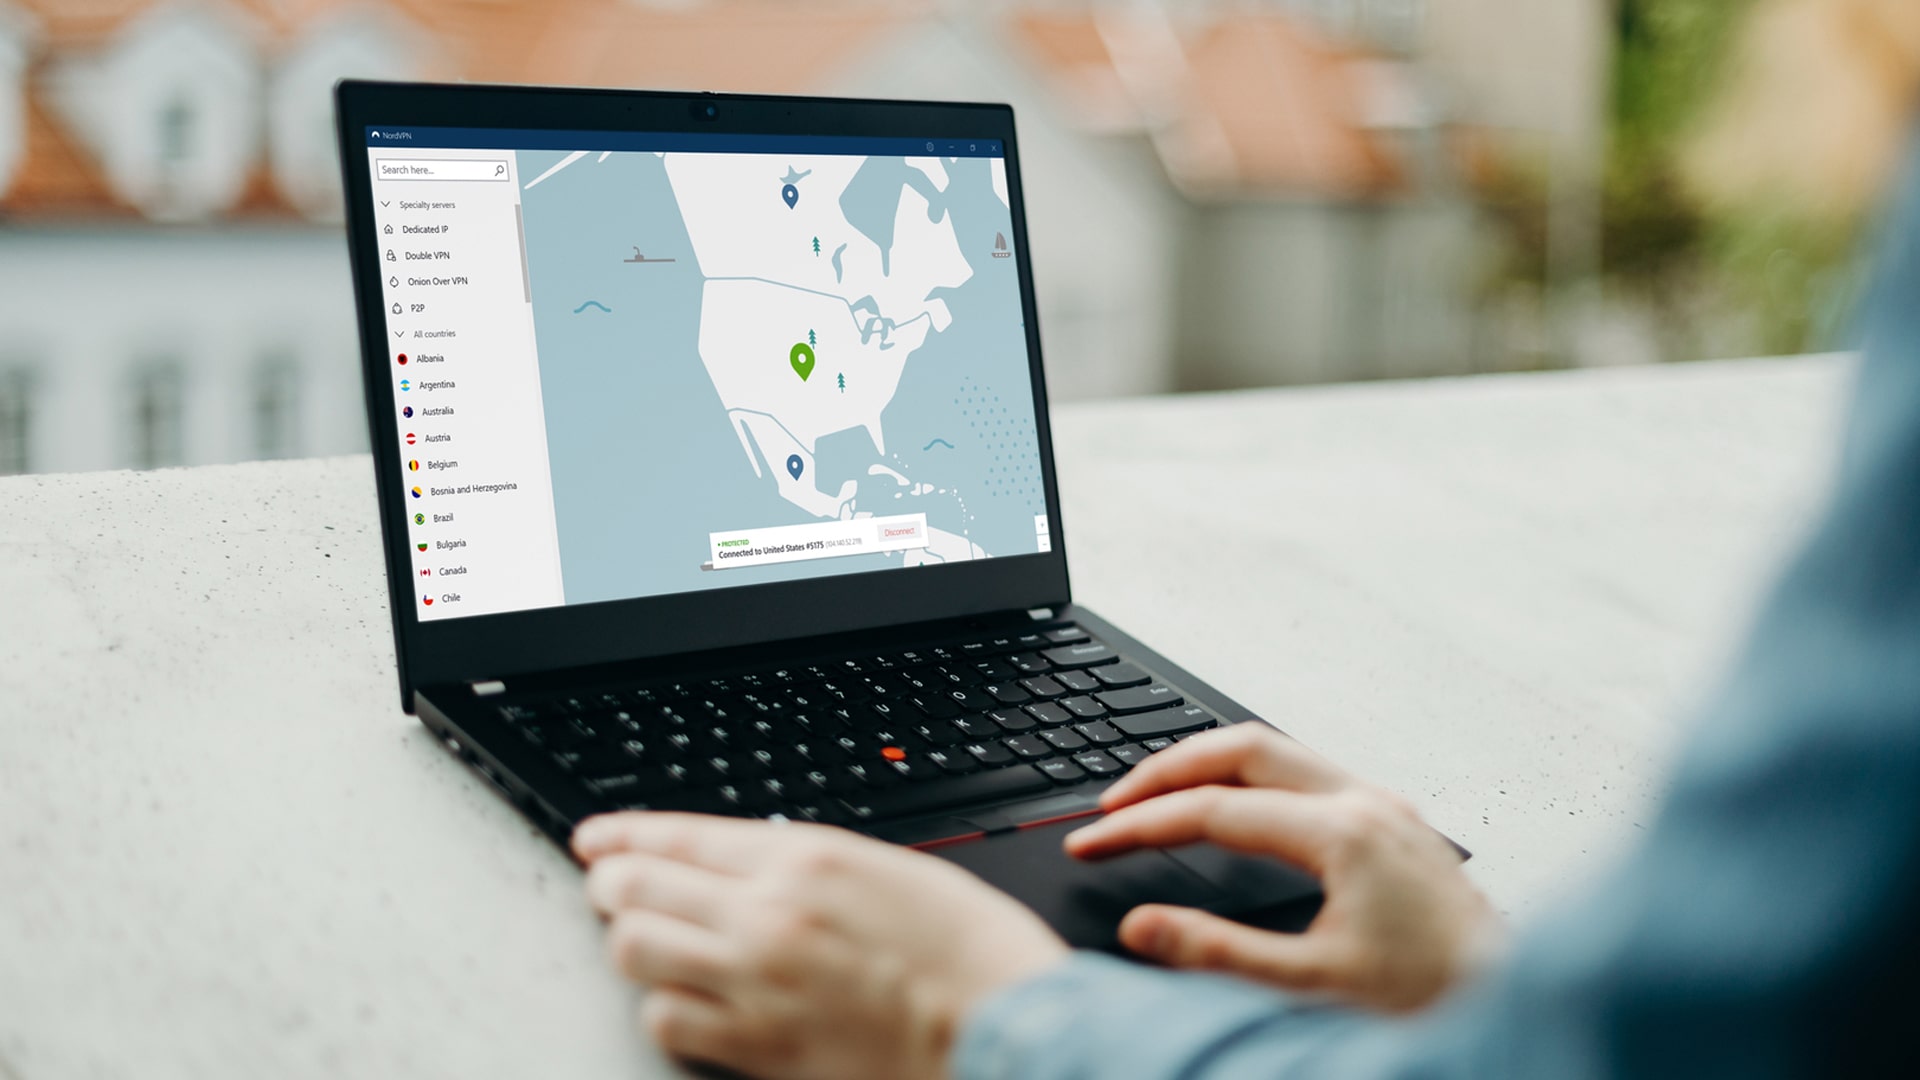 Connection status showing an encrypted VPN tunnel established in NordVPN Windows app